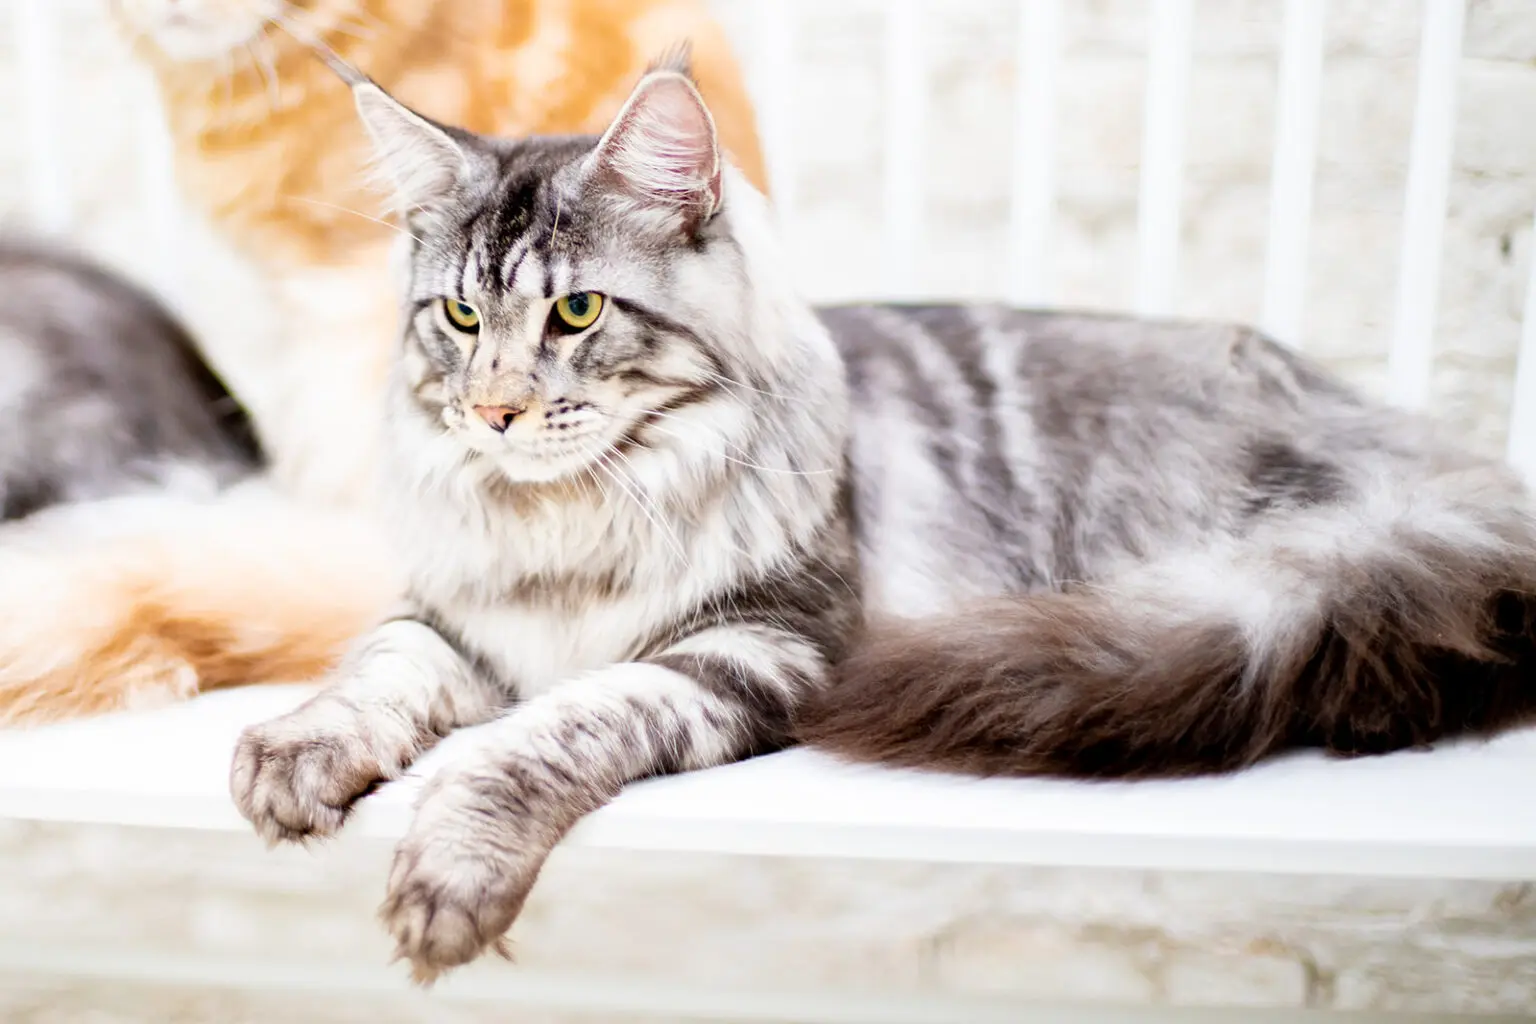 King Maine Coon - Mythic Maine Coons